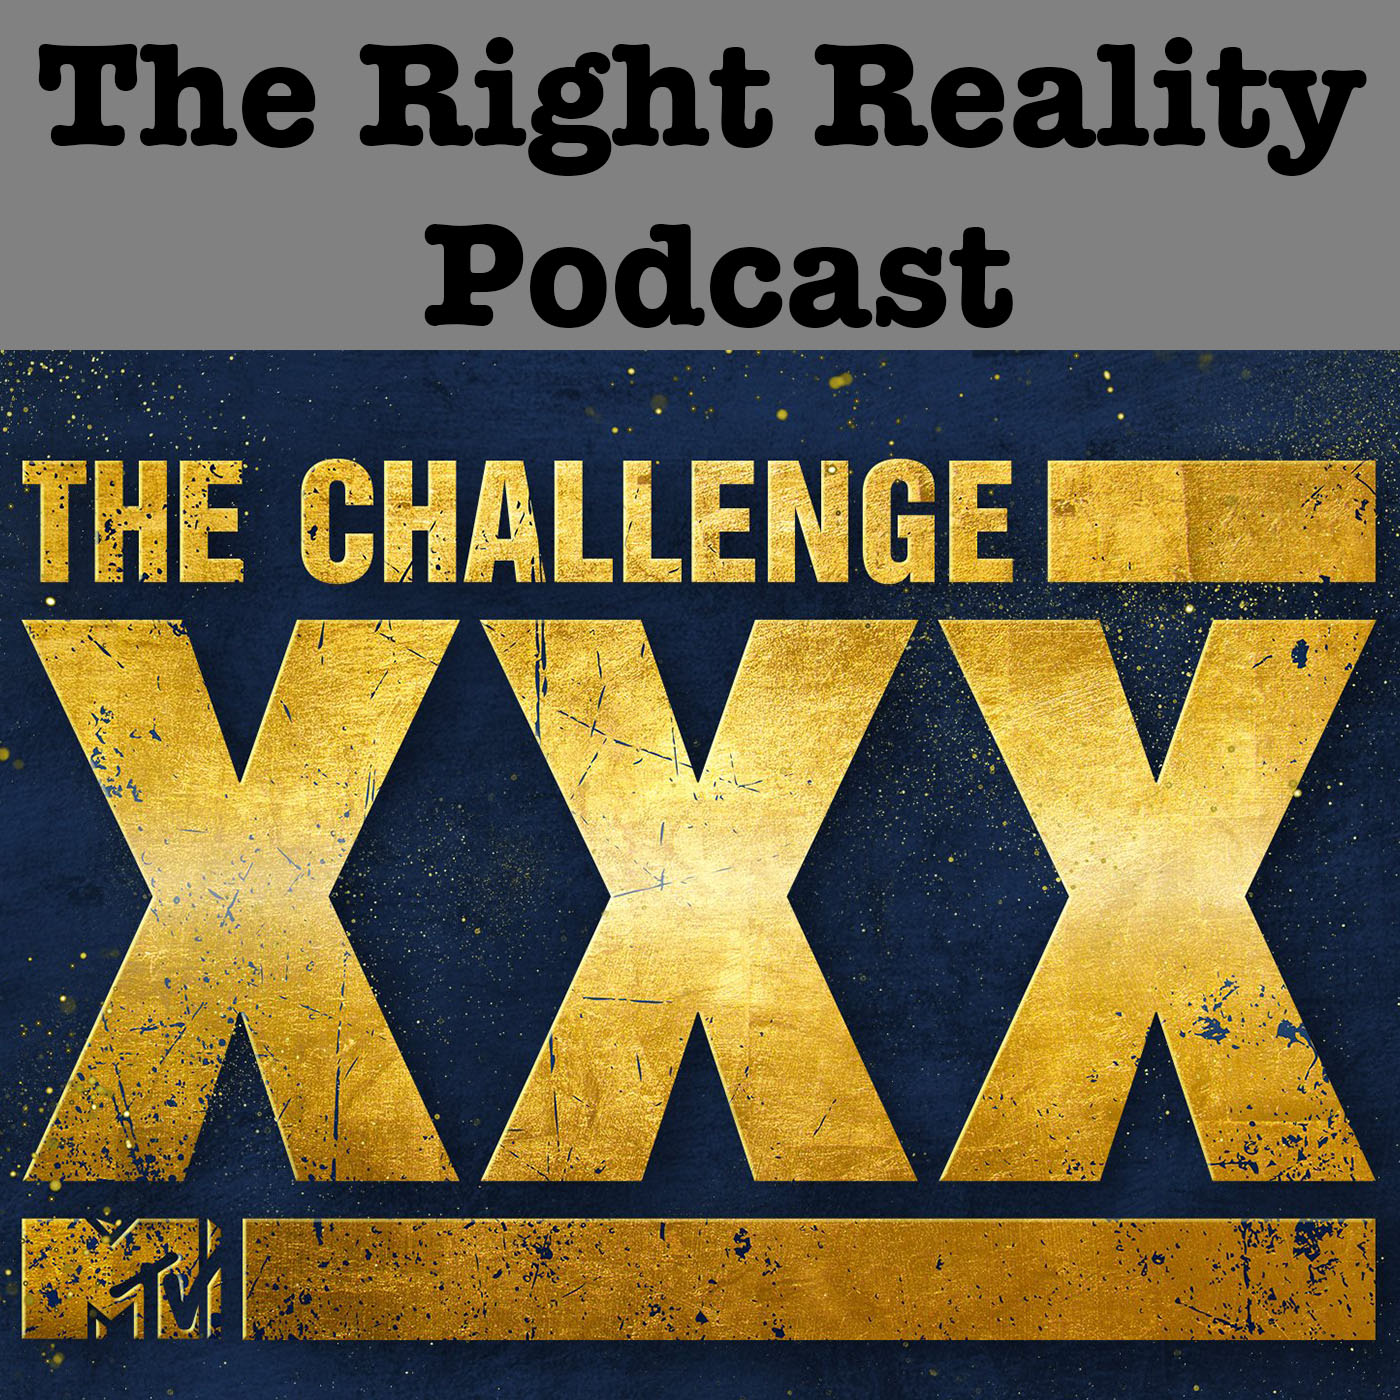 THE FINAL | The Challenge Dirty XXX | The Right Reality Podcast